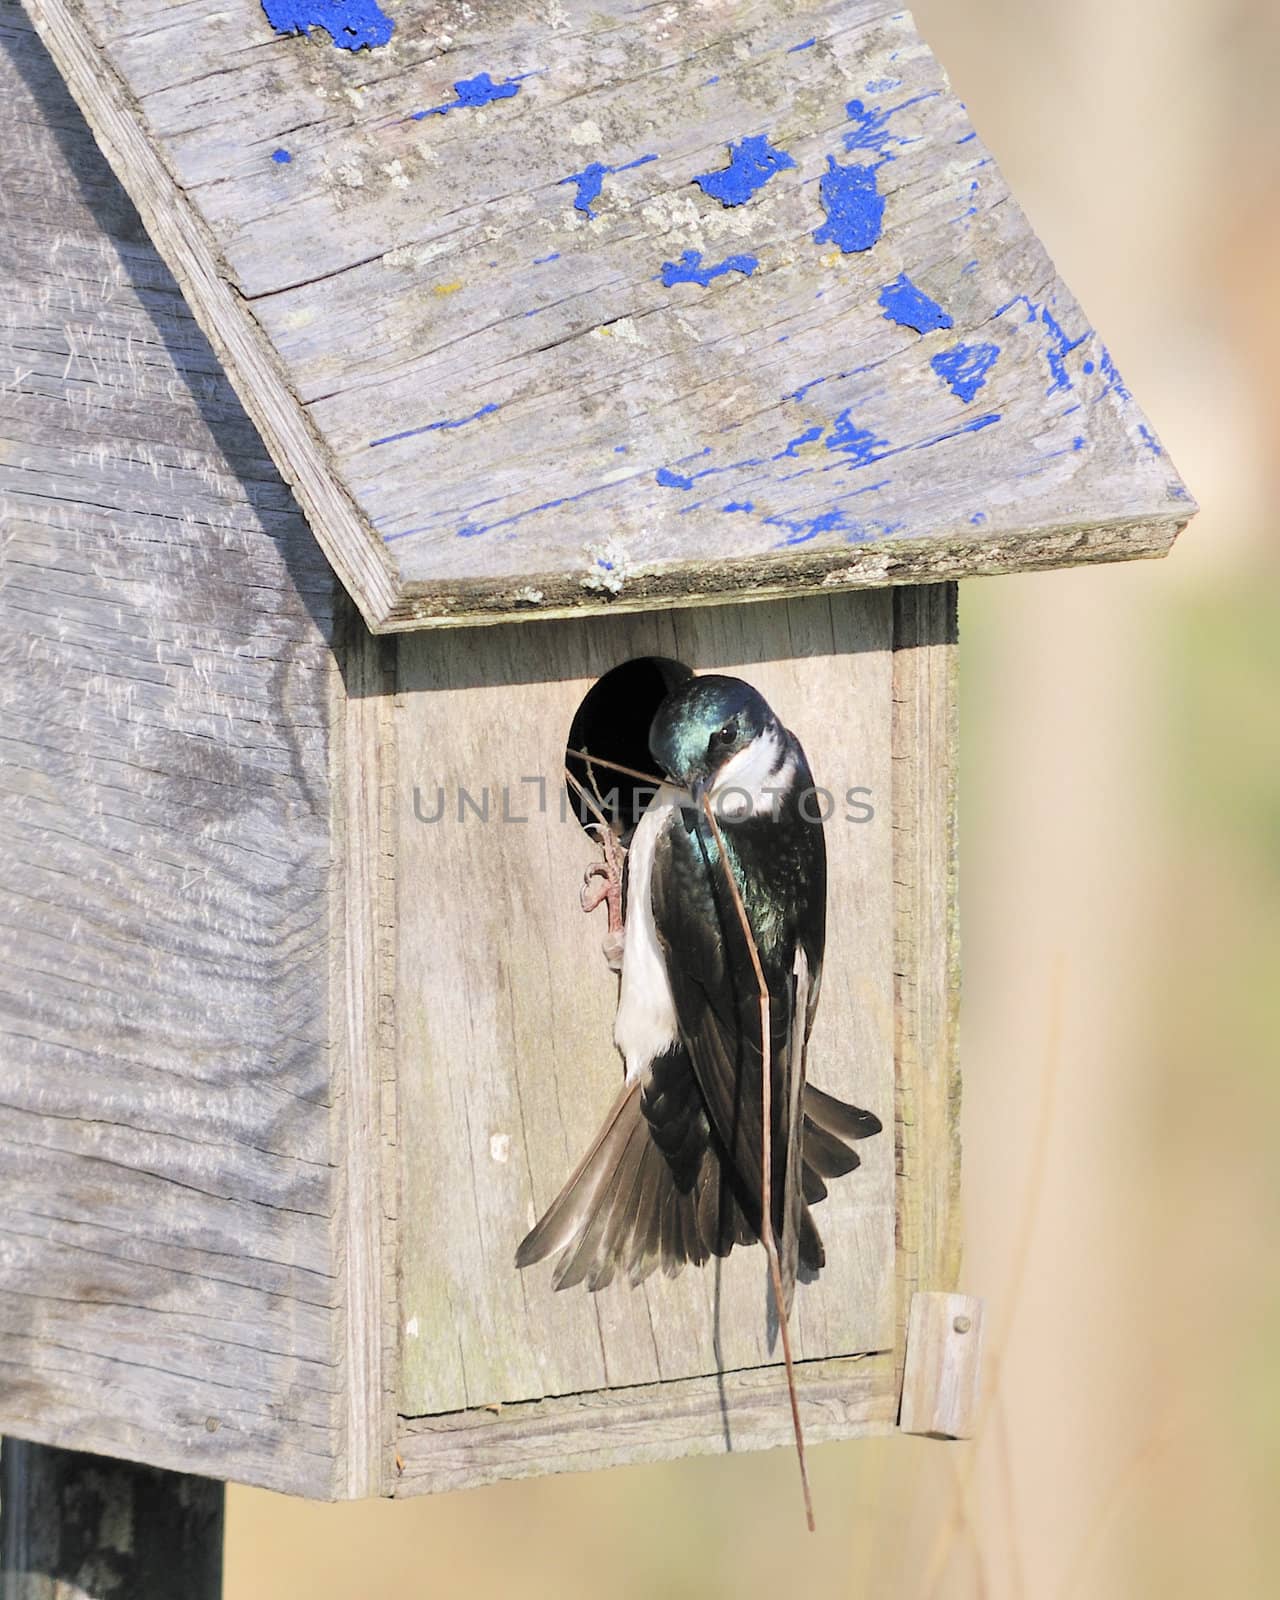 Tree Swallow Nest Building by brm1949